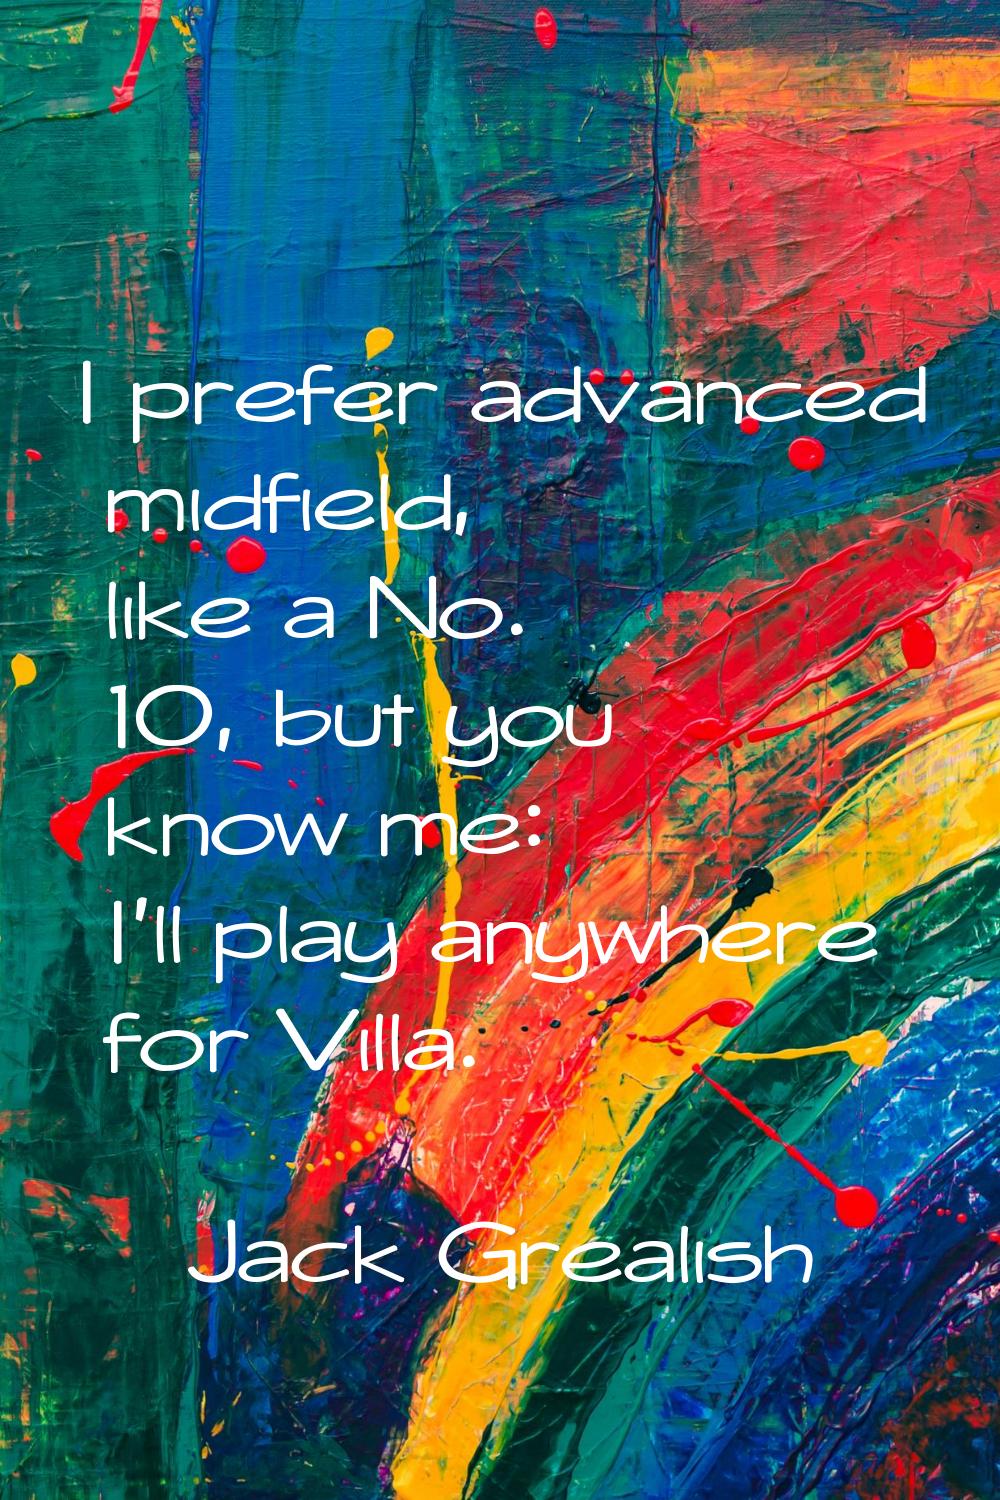 I prefer advanced midfield, like a No. 10, but you know me: I'll play anywhere for Villa.